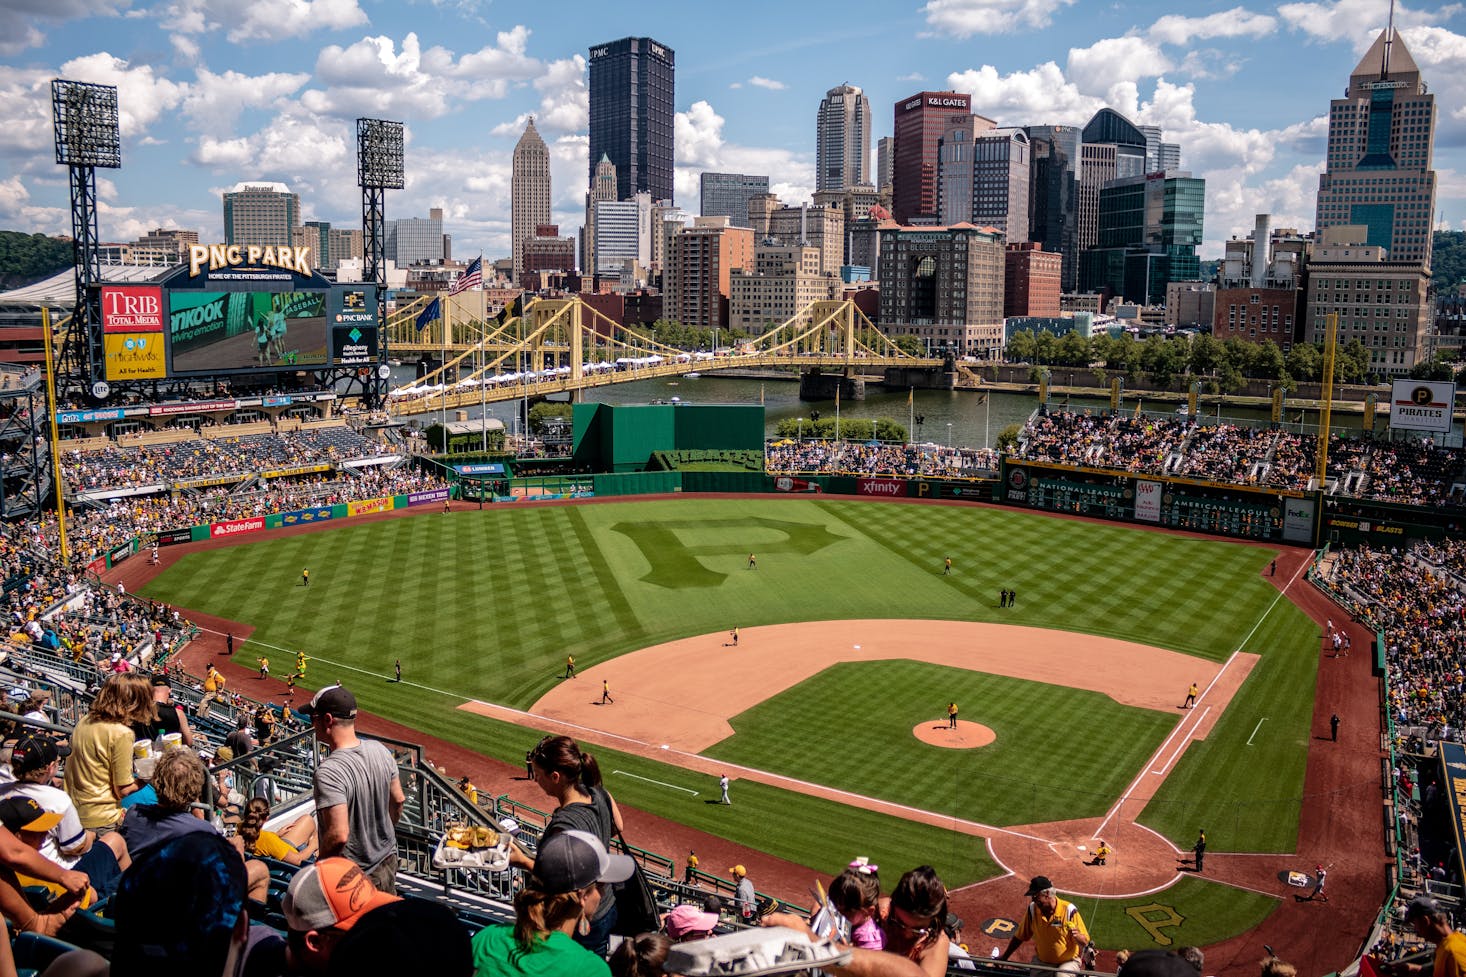  baseball game at PNC Park in Pittsburgh